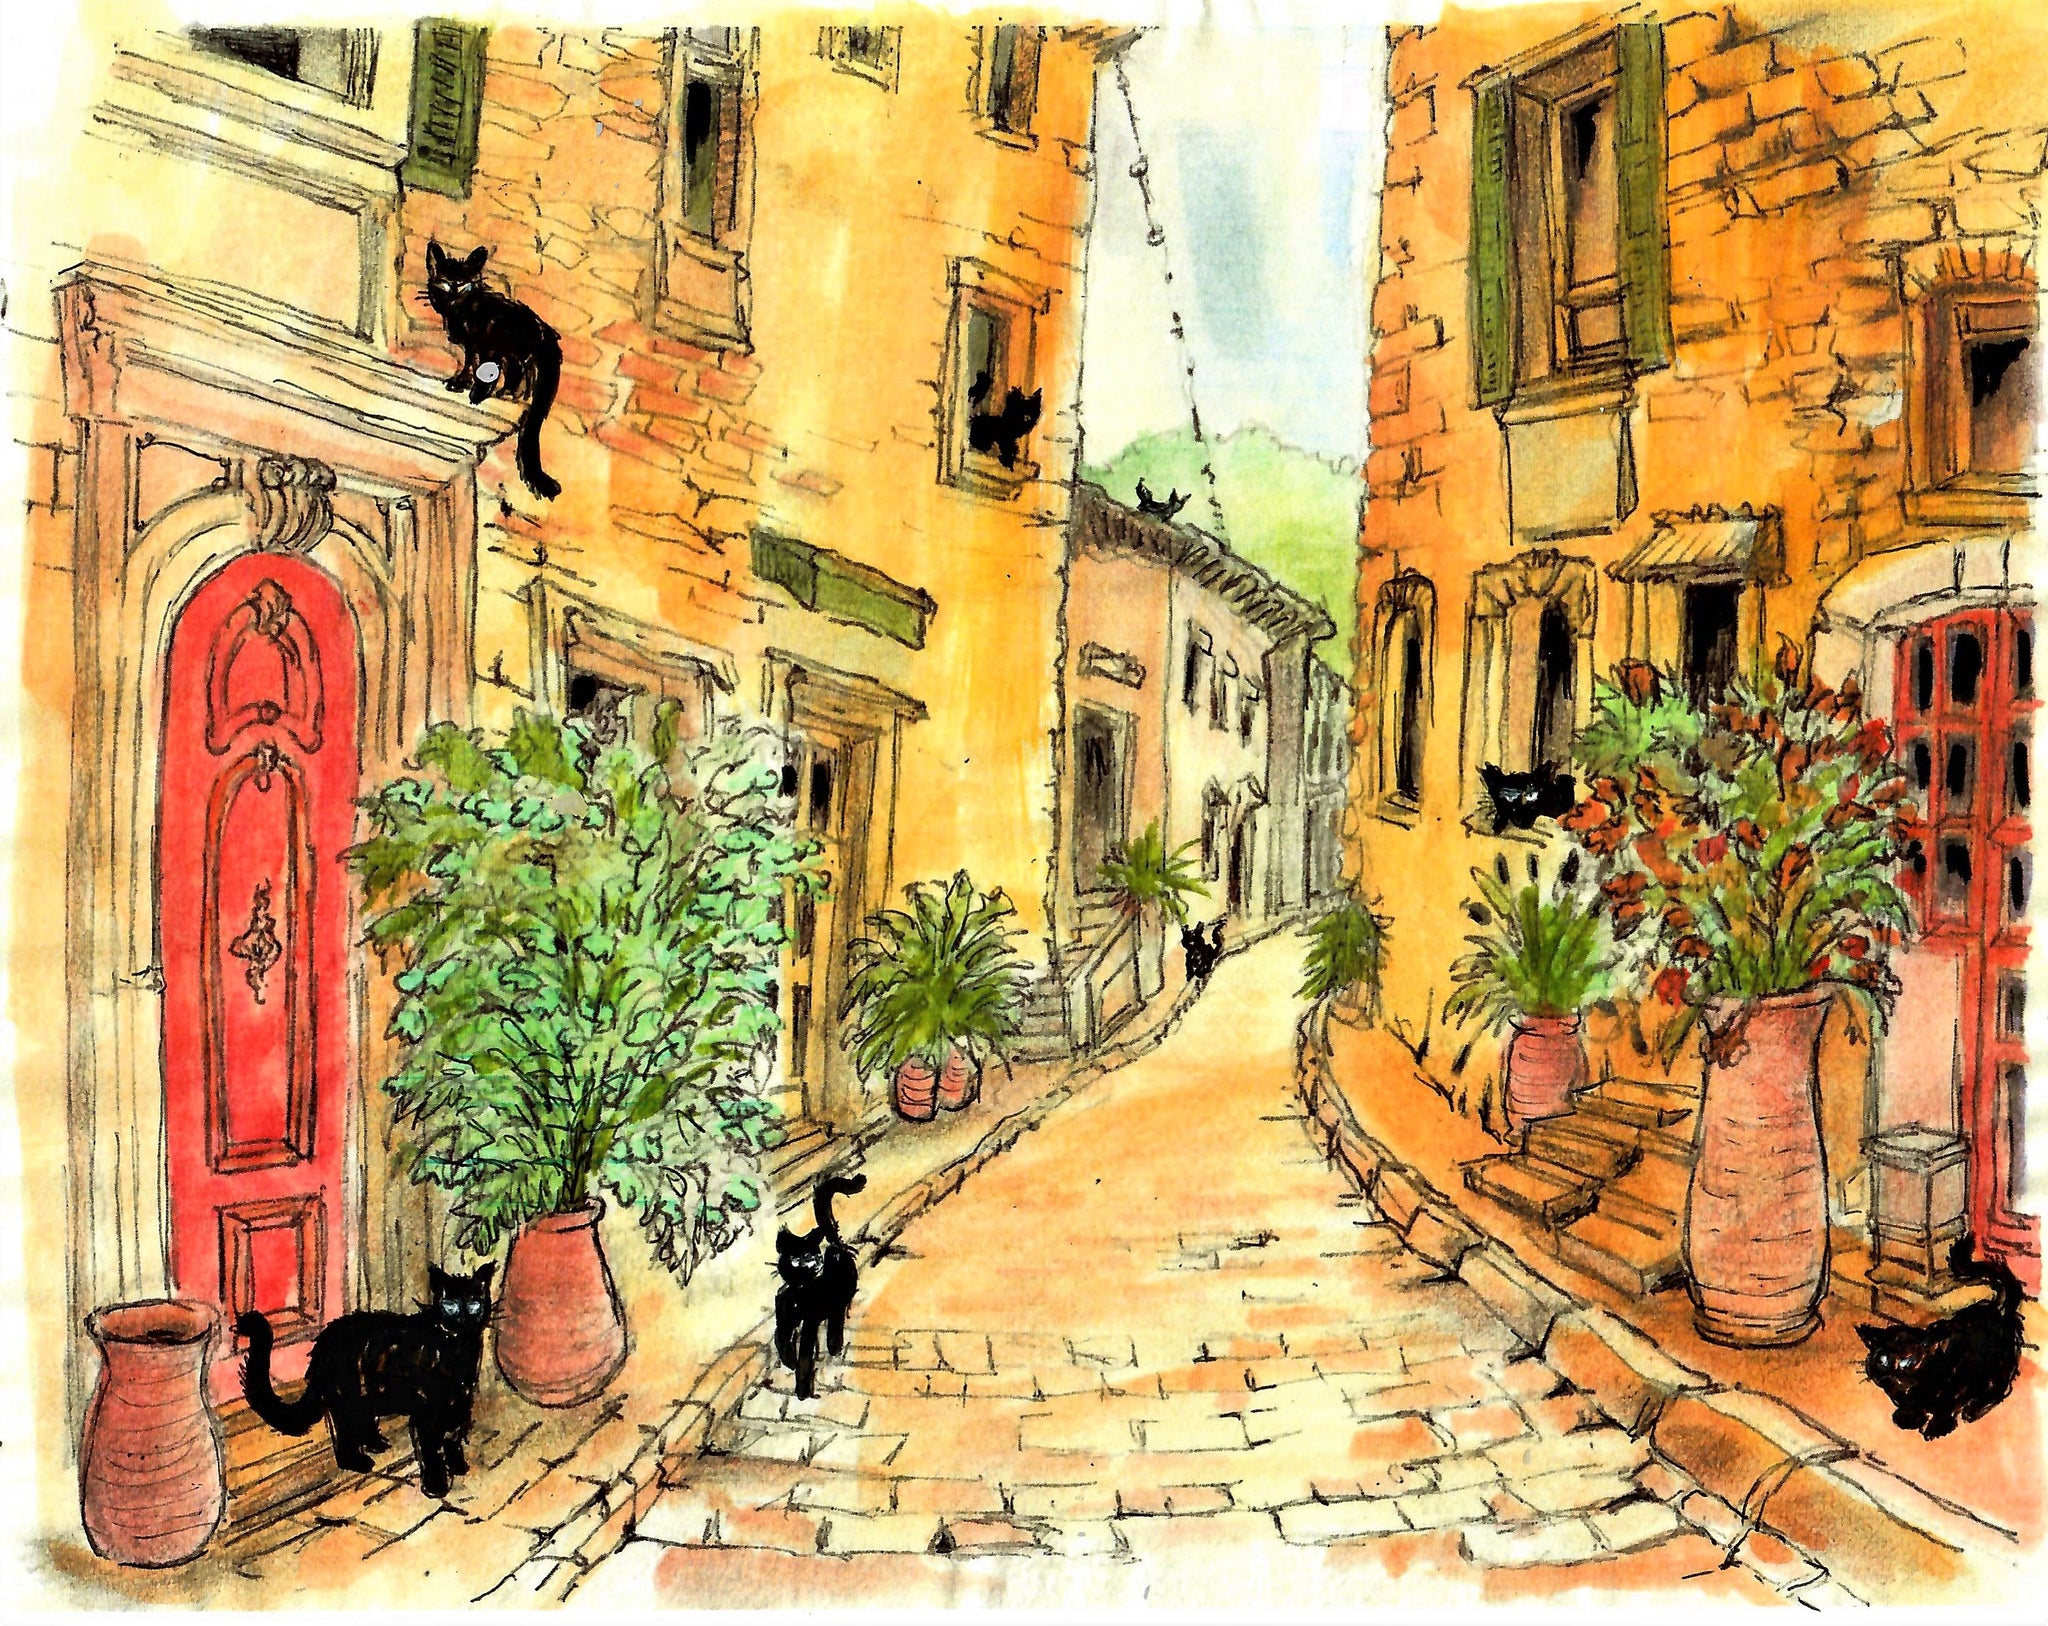 Cats Lounging In A Beautiful Small Italian Village Alley